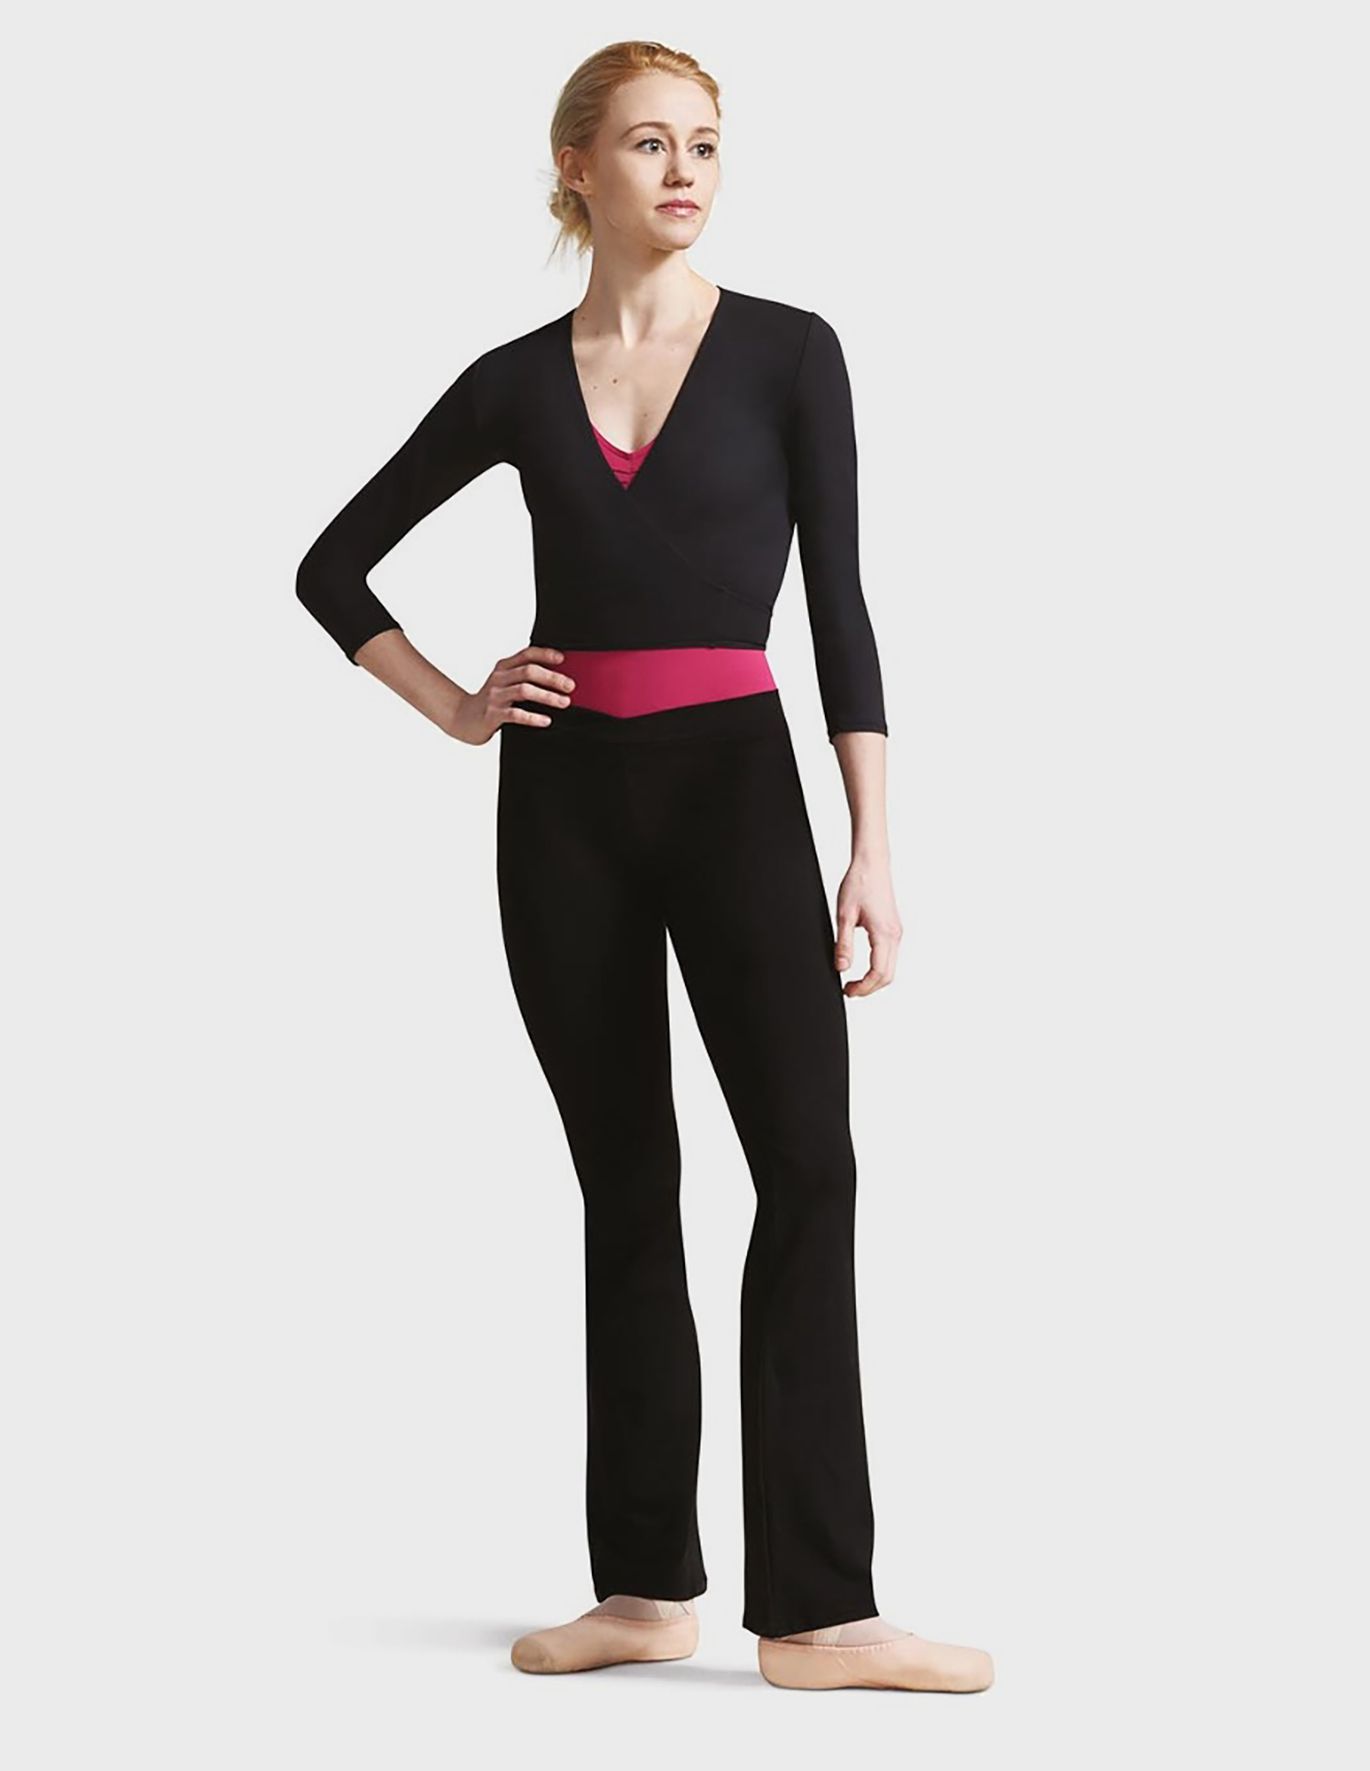 Women's Jazz Pants with Variable Inseam by Capezio : TC750, On